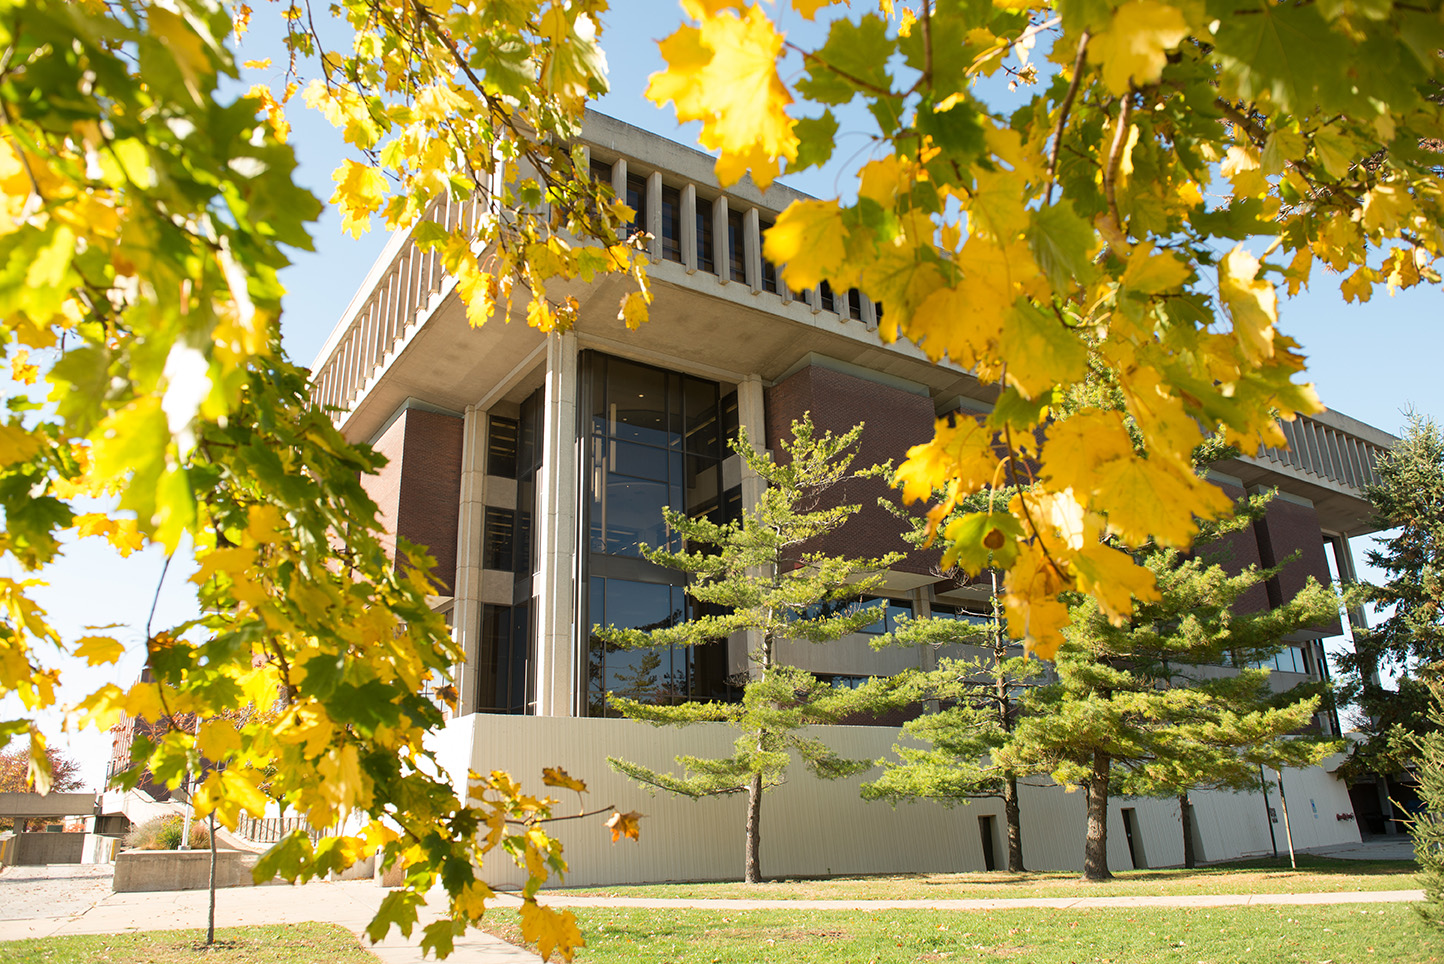 Milner Library seen through trees turning to a golden yellow in fall